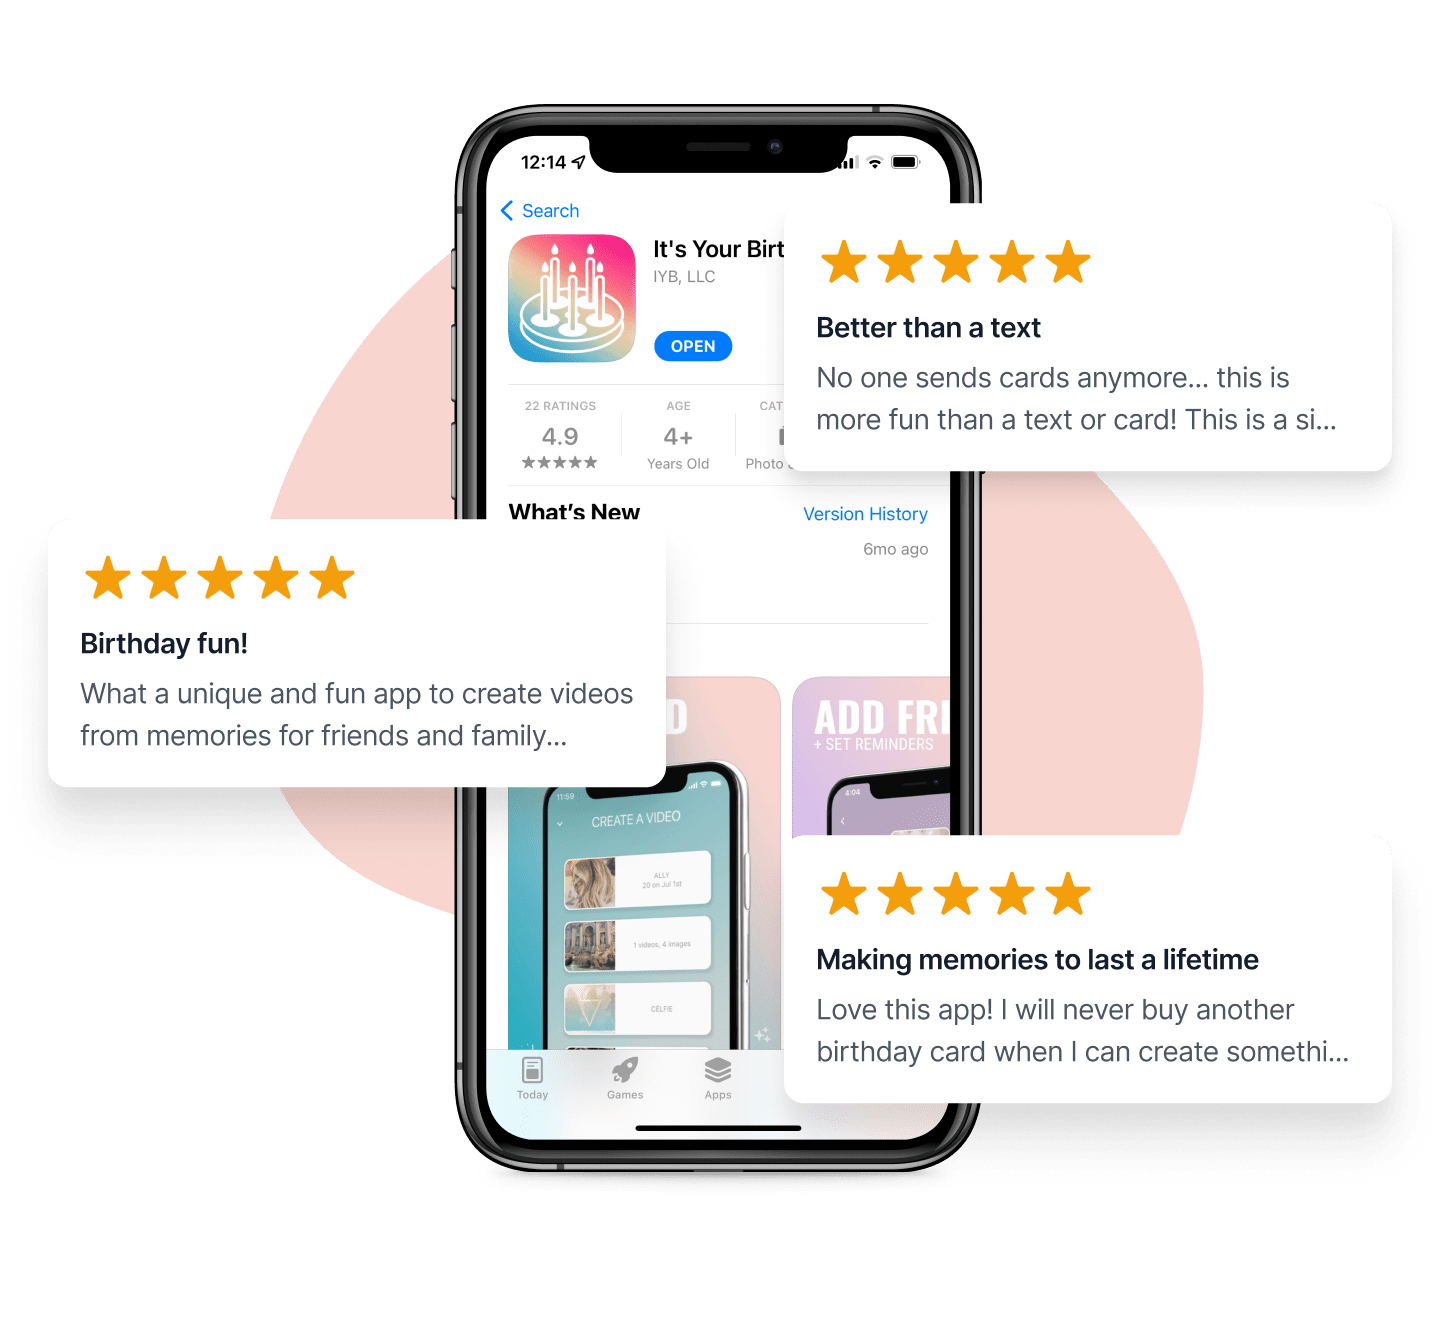 IYB's mobile app overlaid with 5-star reviews from the iOS App Store